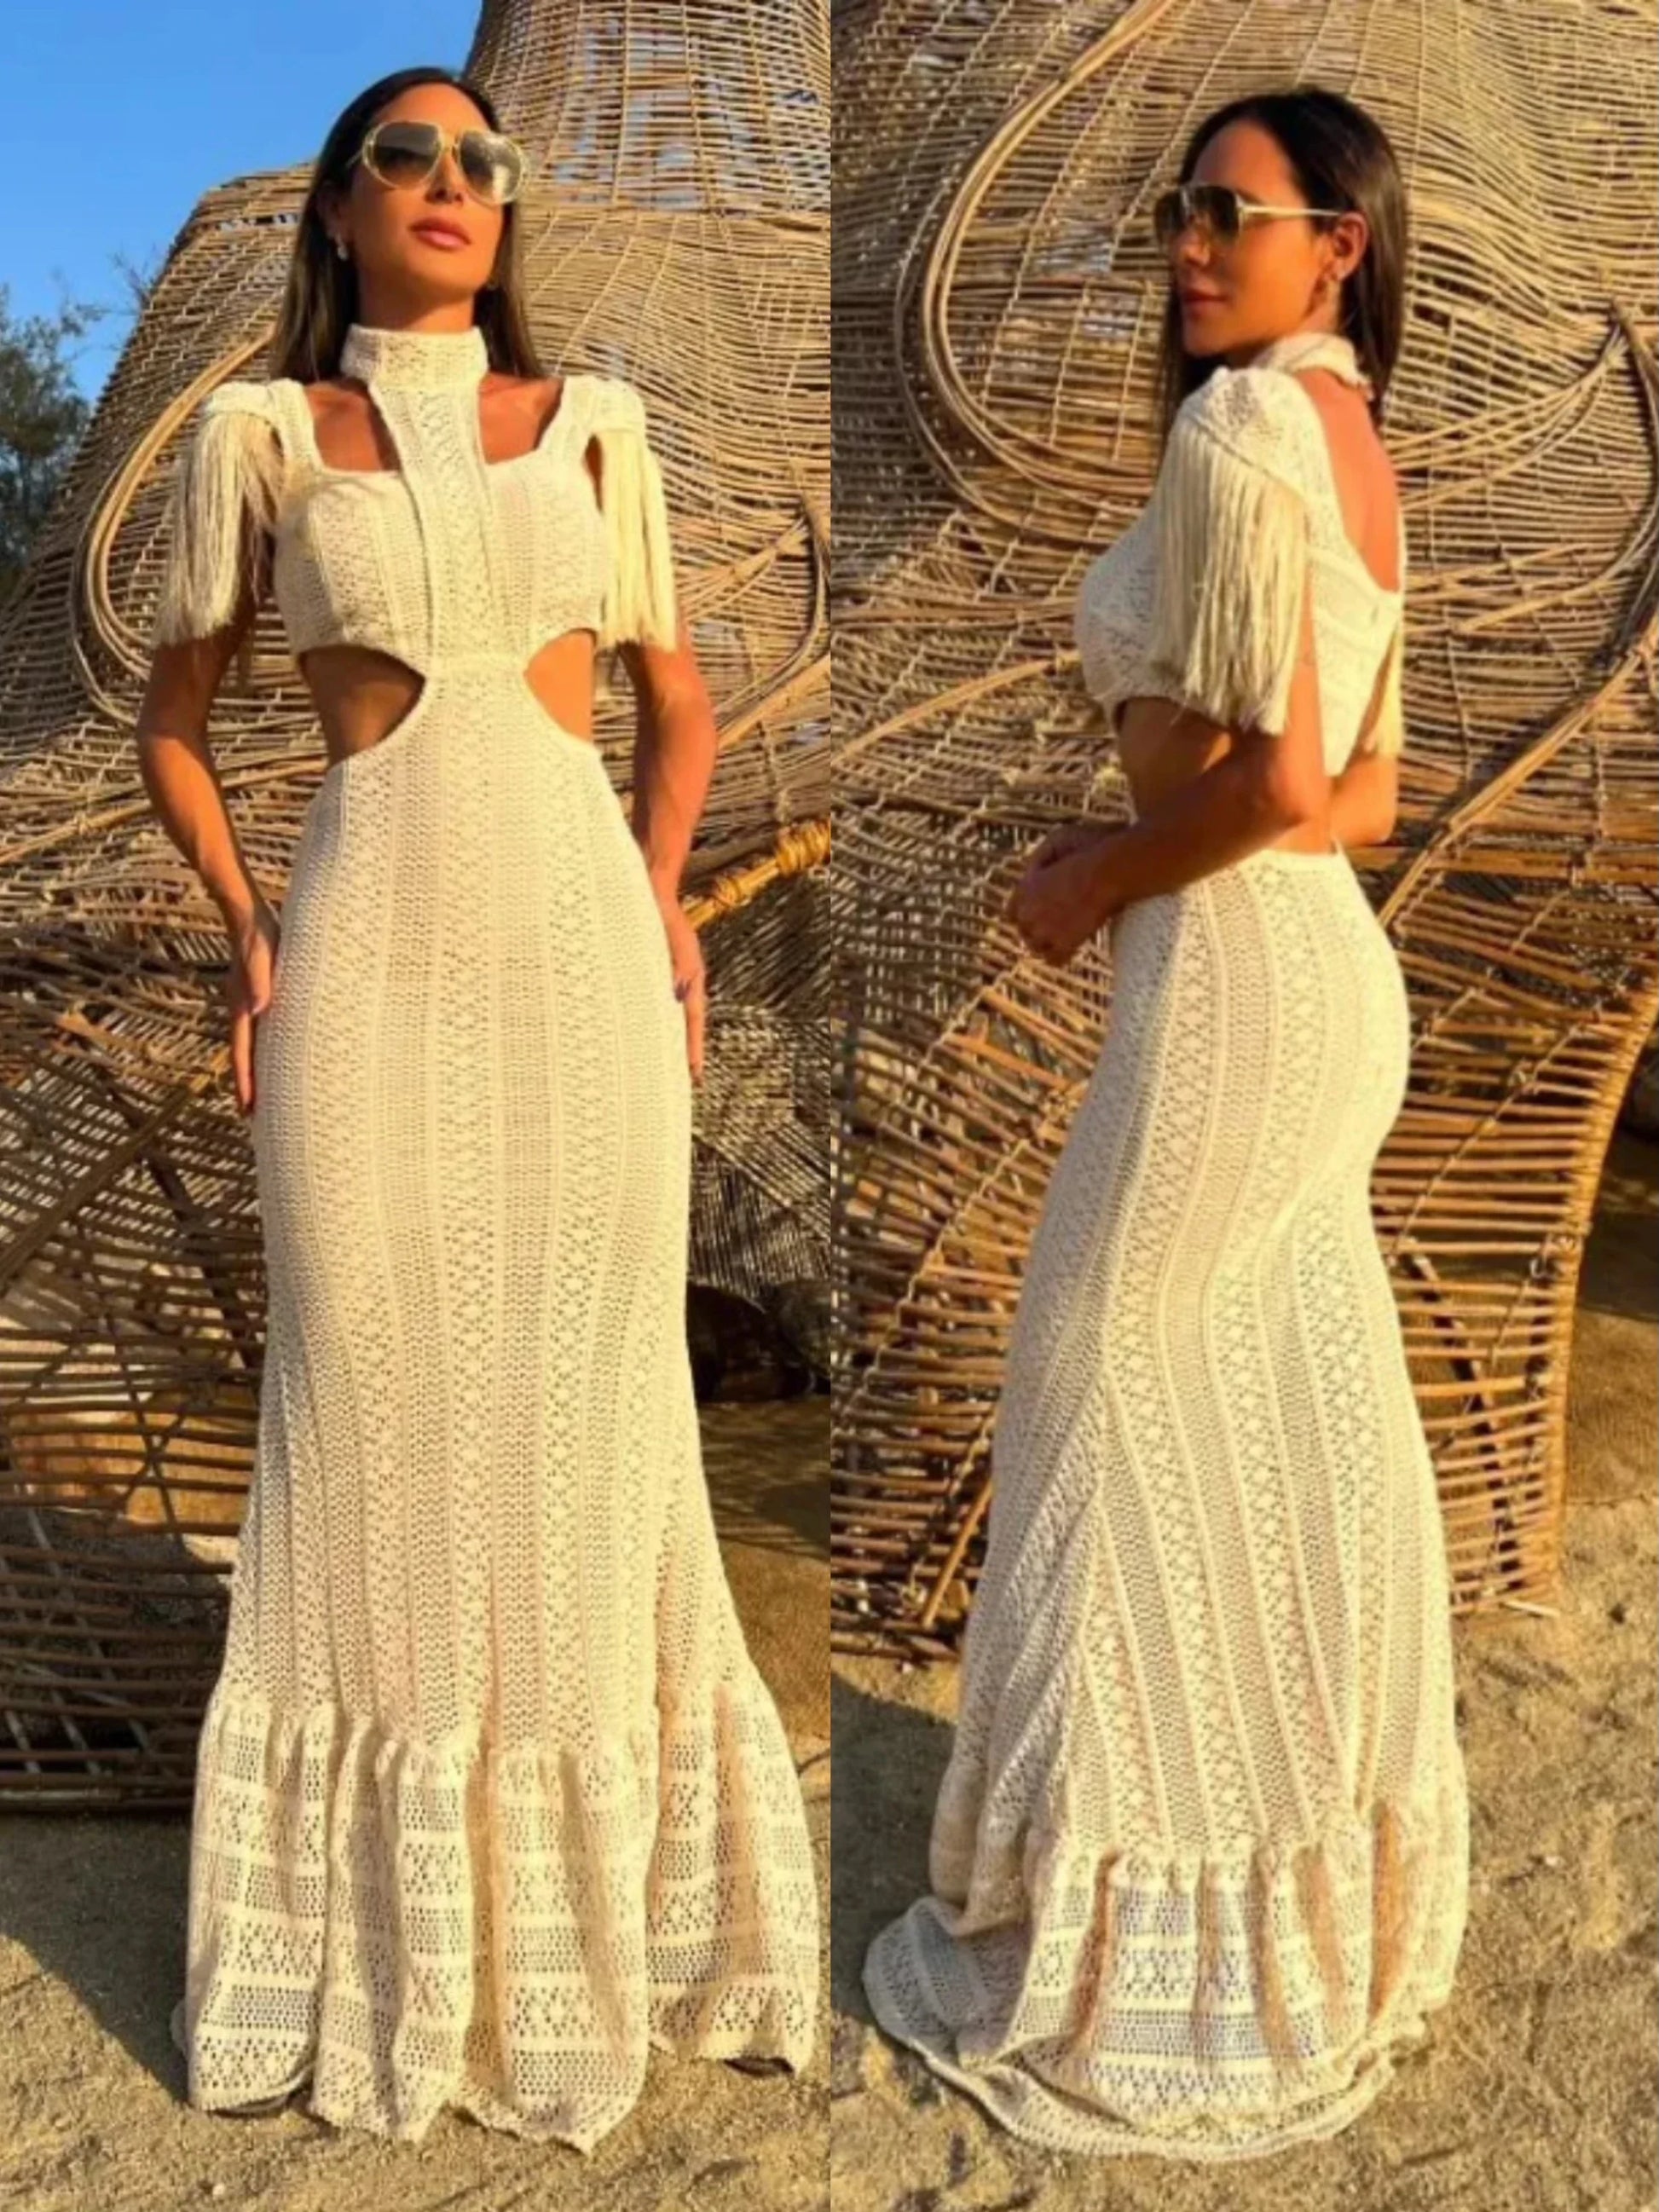 White Lace Turtleneck Dress: Sexy Slim Fit with Tassel Sleeves - All Dresses - Dresses - 1 - 2024